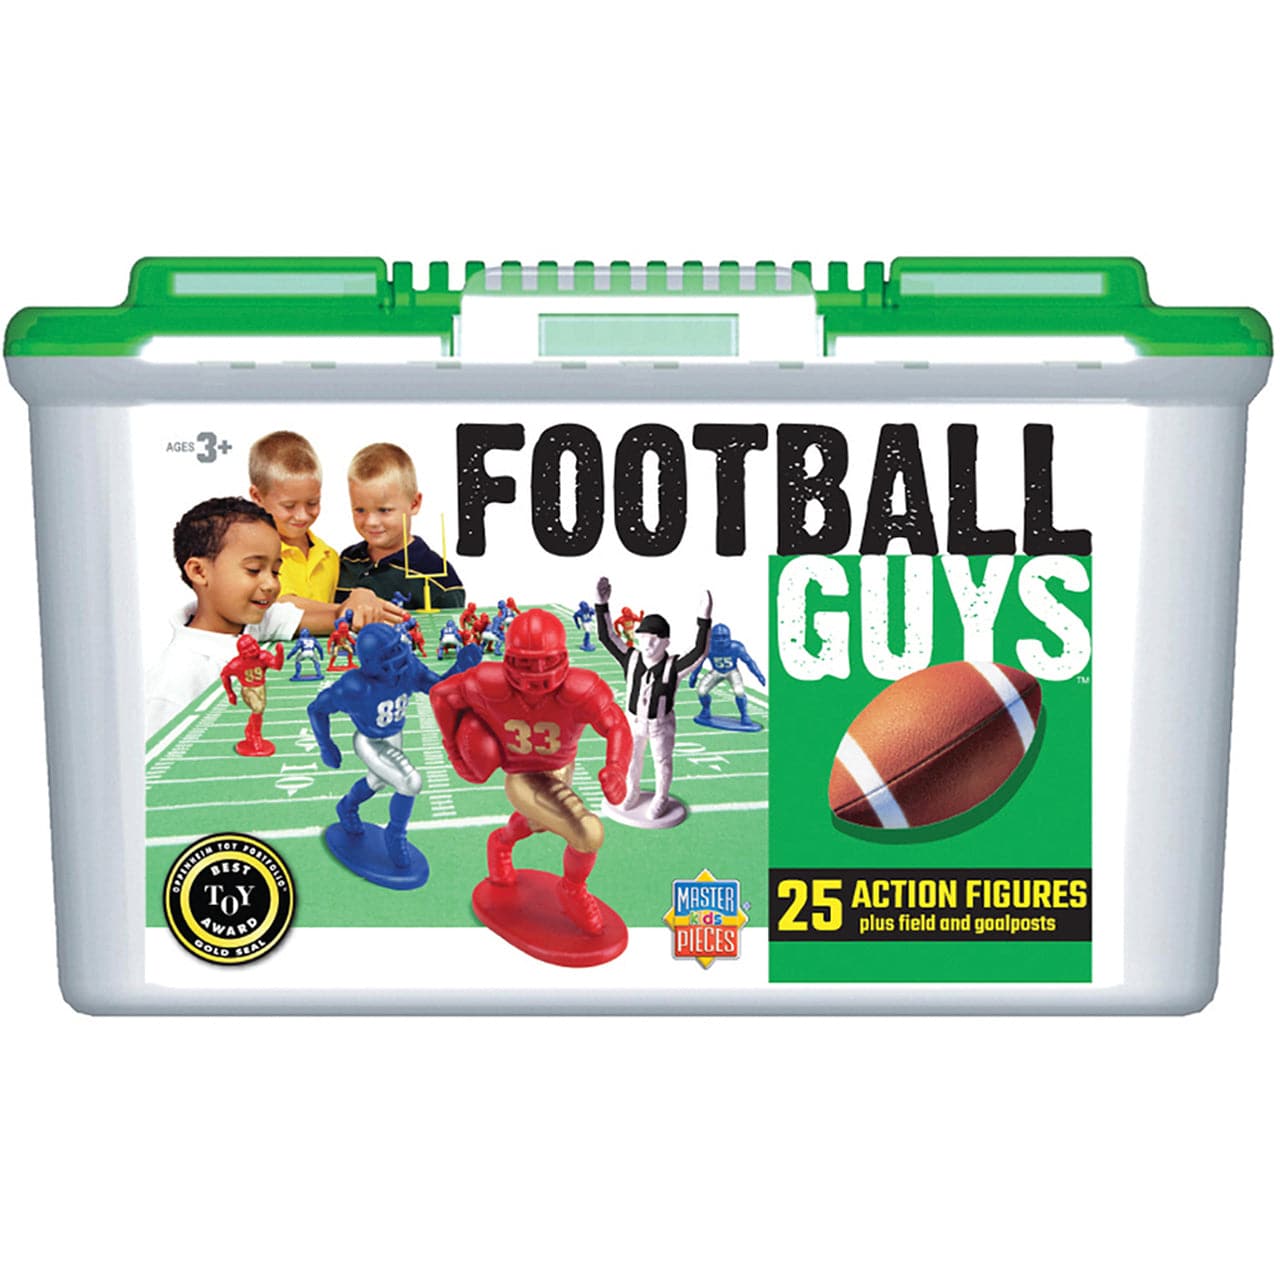 MasterPieces-Football Guys Sports Action Figures-81905-Legacy Toys